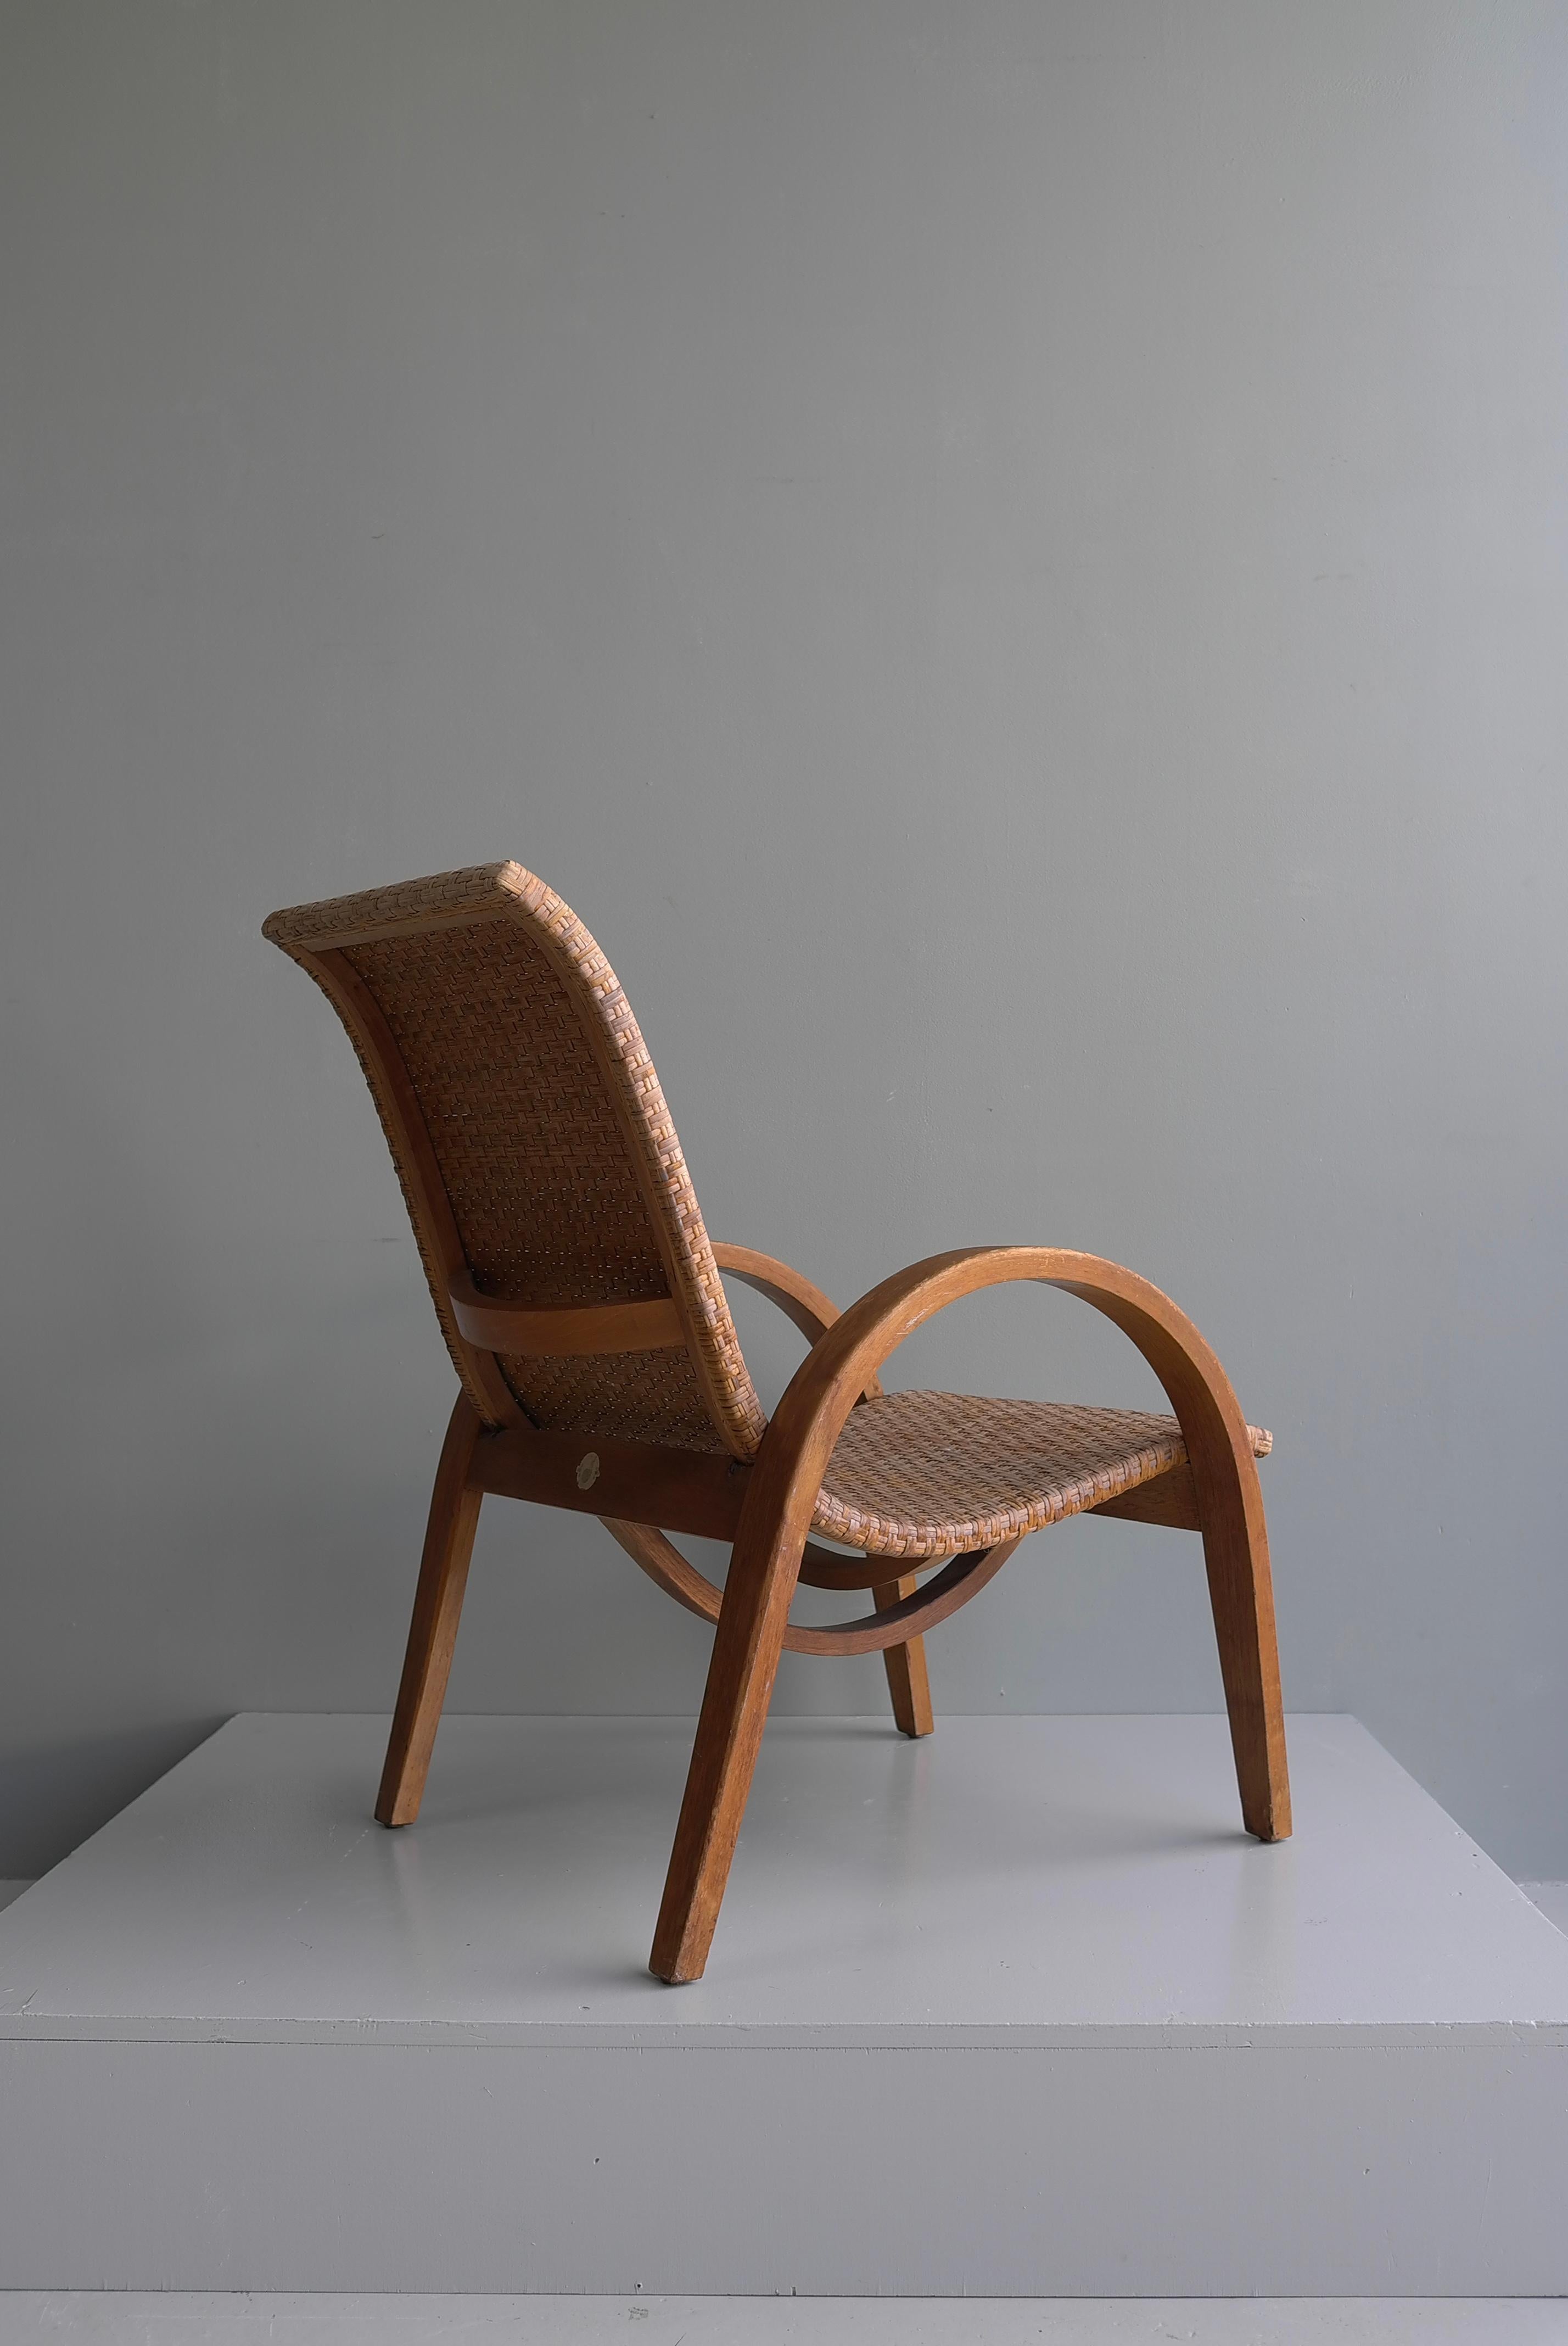 Sculptural Mid-Century Modern Armchair in Wood and Cane, 1950's For Sale 1